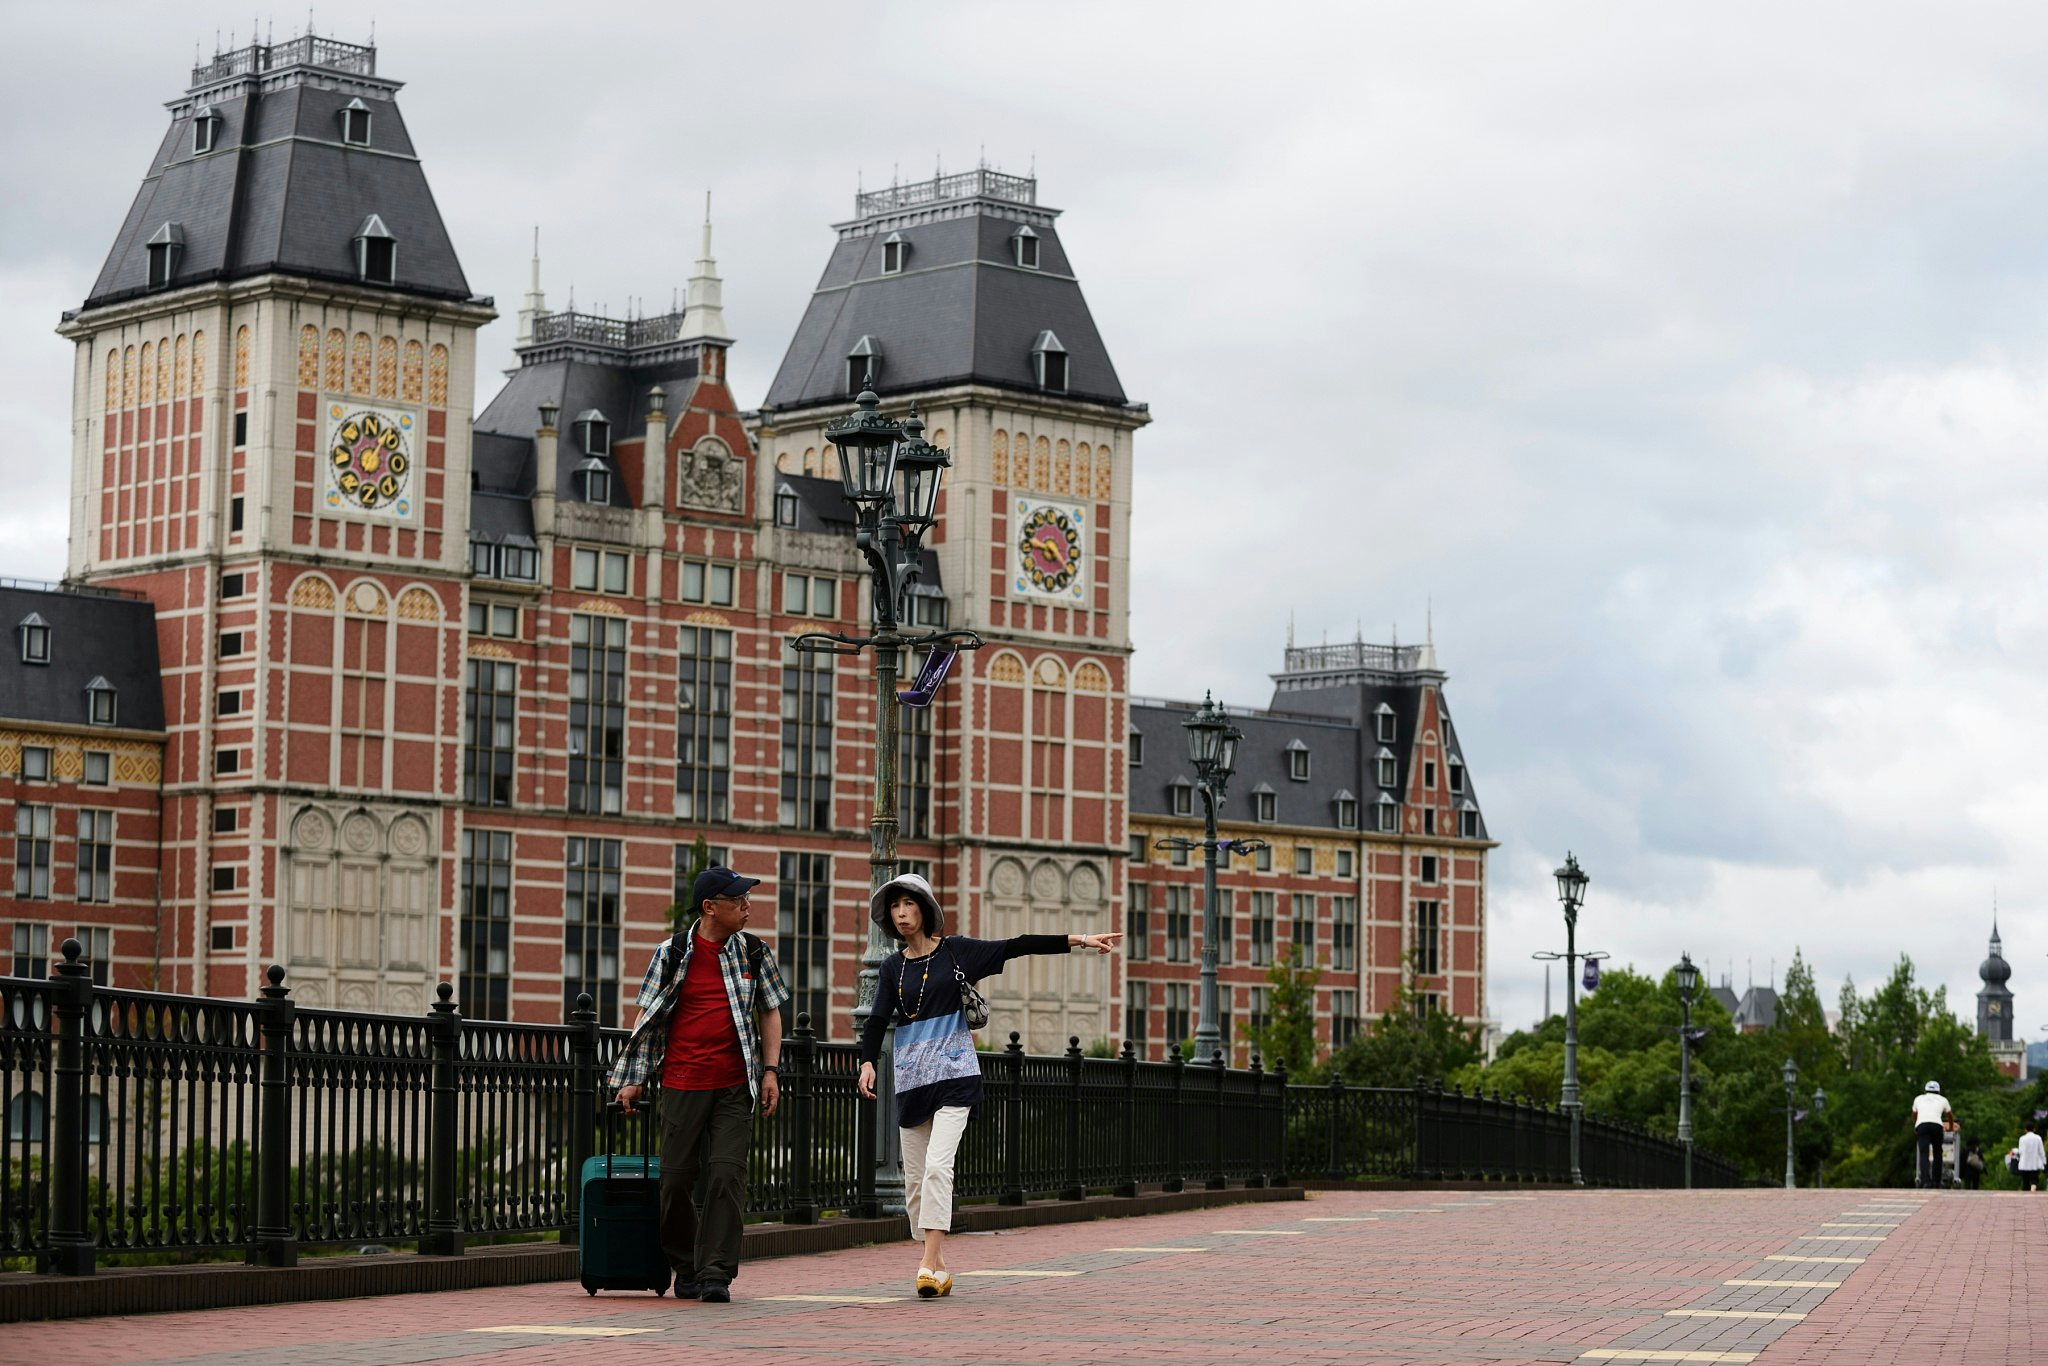 Visitors walk on a bridge at the Dutch-themed Huis Ten Bosch amusement park, operated by Huis Ten Bosch Co., in Sasebo, Nagasaki Prefecture, Japan, on Friday, July 17, 2015. Huis Ten Bosch is spread across 1.52 million square meters (376 acres), about twice the size of Tokyo Disneyland, according to its website. Photographer: Akio Kon/Bloomberg